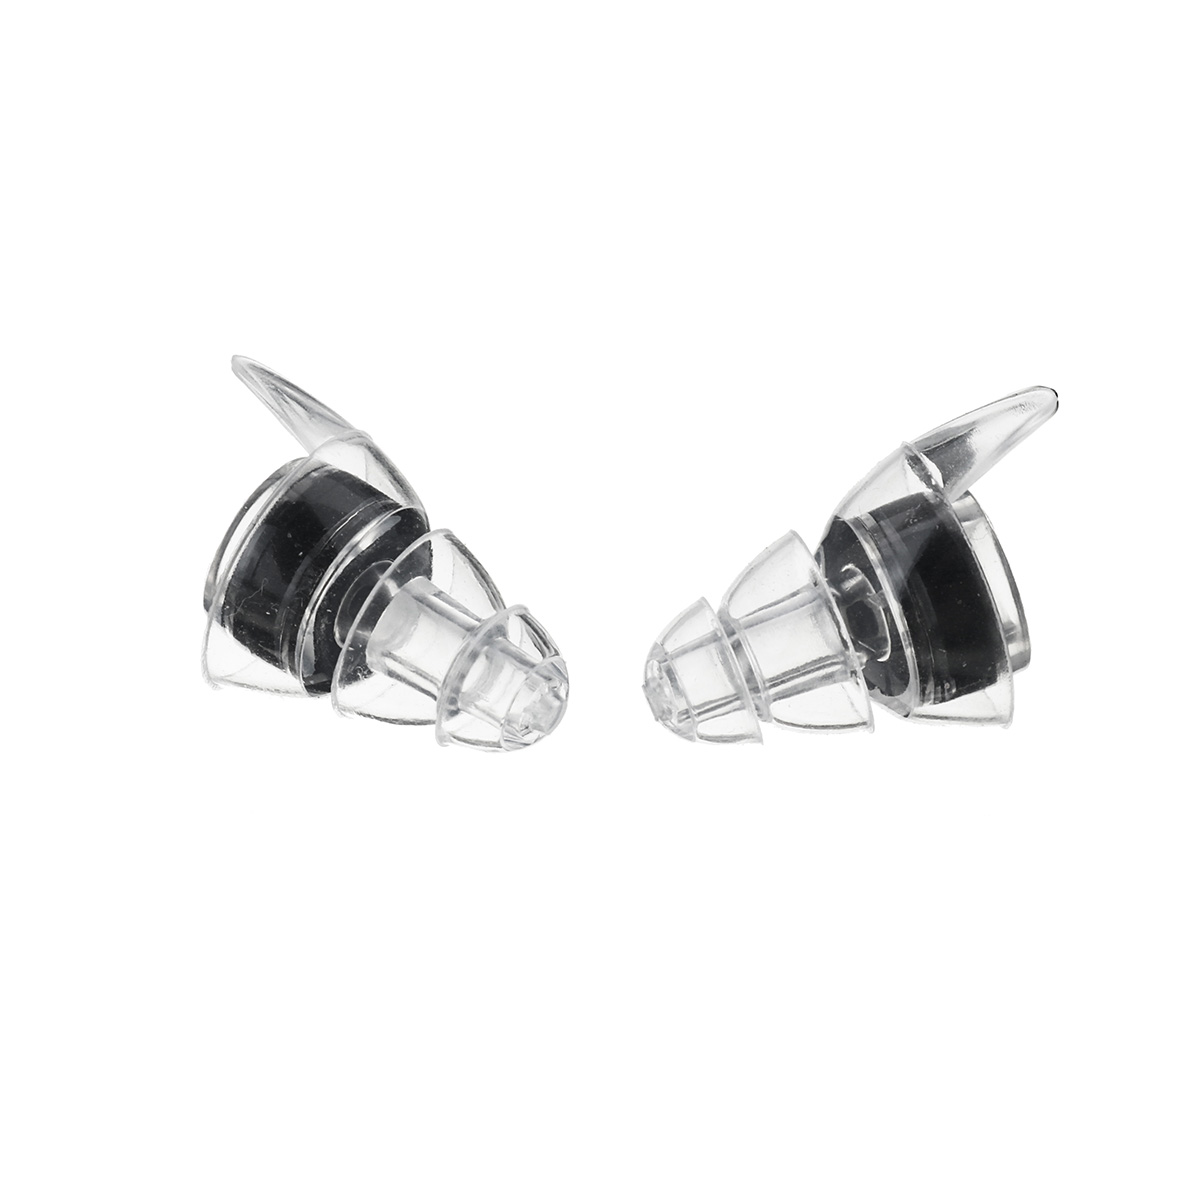 1-Pair-27db-Noise-Cancelling-Hearing-Protection-Earplugs-Camping-Travel-Cycling-Sleeping-Swimming-Ea-1650800-5